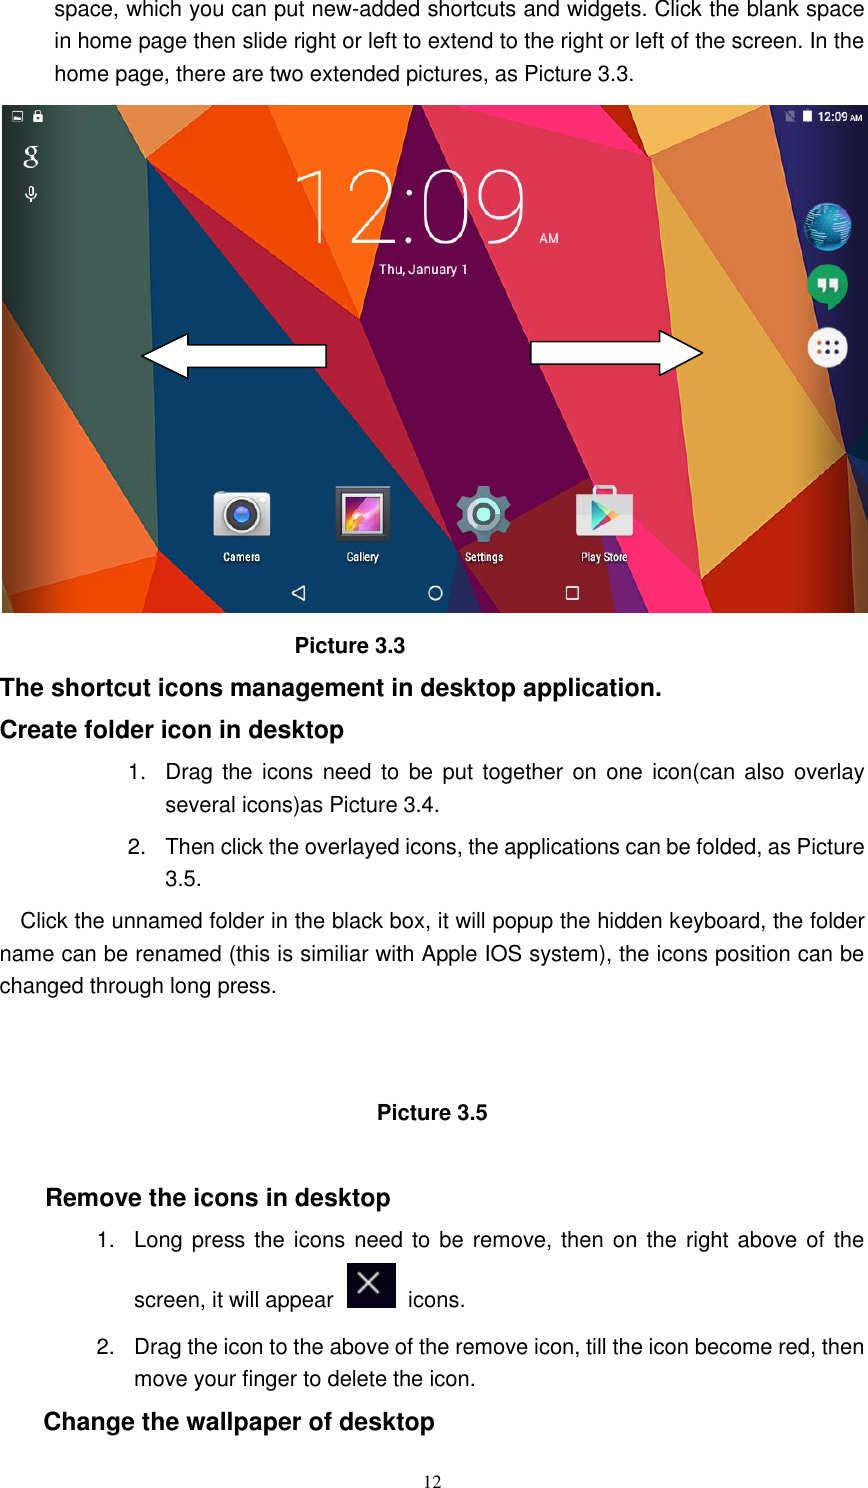      12 space, which you can put new-added shortcuts and widgets. Click the blank space in home page then slide right or left to extend to the right or left of the screen. In the home page, there are two extended pictures, as Picture 3.3.                             Picture 3.3 The shortcut icons management in desktop application. Create folder icon in desktop 1.  Drag  the  icons need  to  be put together  on one icon(can also overlay several icons)as Picture 3.4.   2.  Then click the overlayed icons, the applications can be folded, as Picture 3.5. Click the unnamed folder in the black box, it will popup the hidden keyboard, the folder name can be renamed (this is similiar with Apple IOS system), the icons position can be changed through long press.   Picture 3.5  Remove the icons in desktop 1.  Long press the icons need to be remove, then on the right above of the screen, it will appear    icons. 2.  Drag the icon to the above of the remove icon, till the icon become red, then move your finger to delete the icon. Change the wallpaper of desktop 